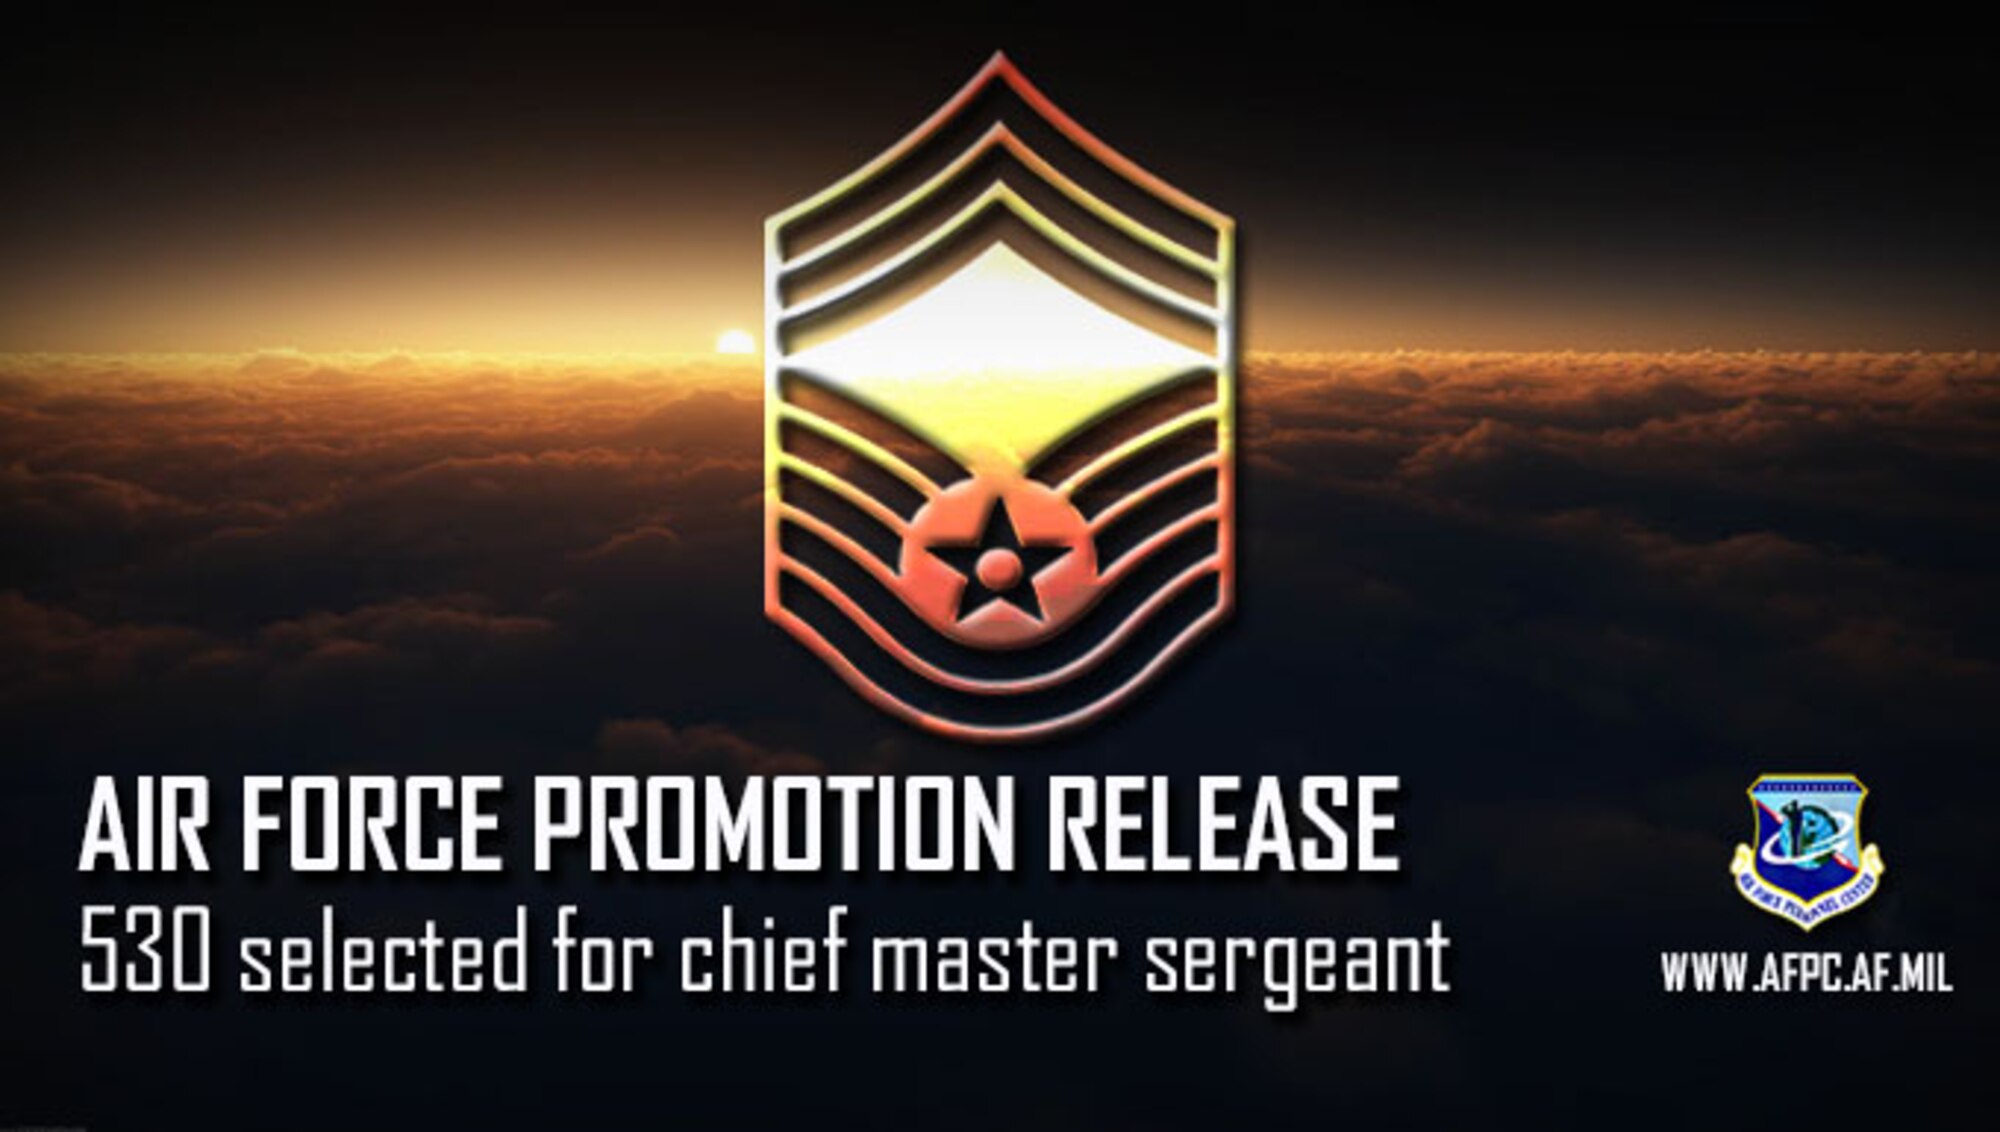 Graphic with chief master sergeant stripes announcing 530 selected for promotion to chief